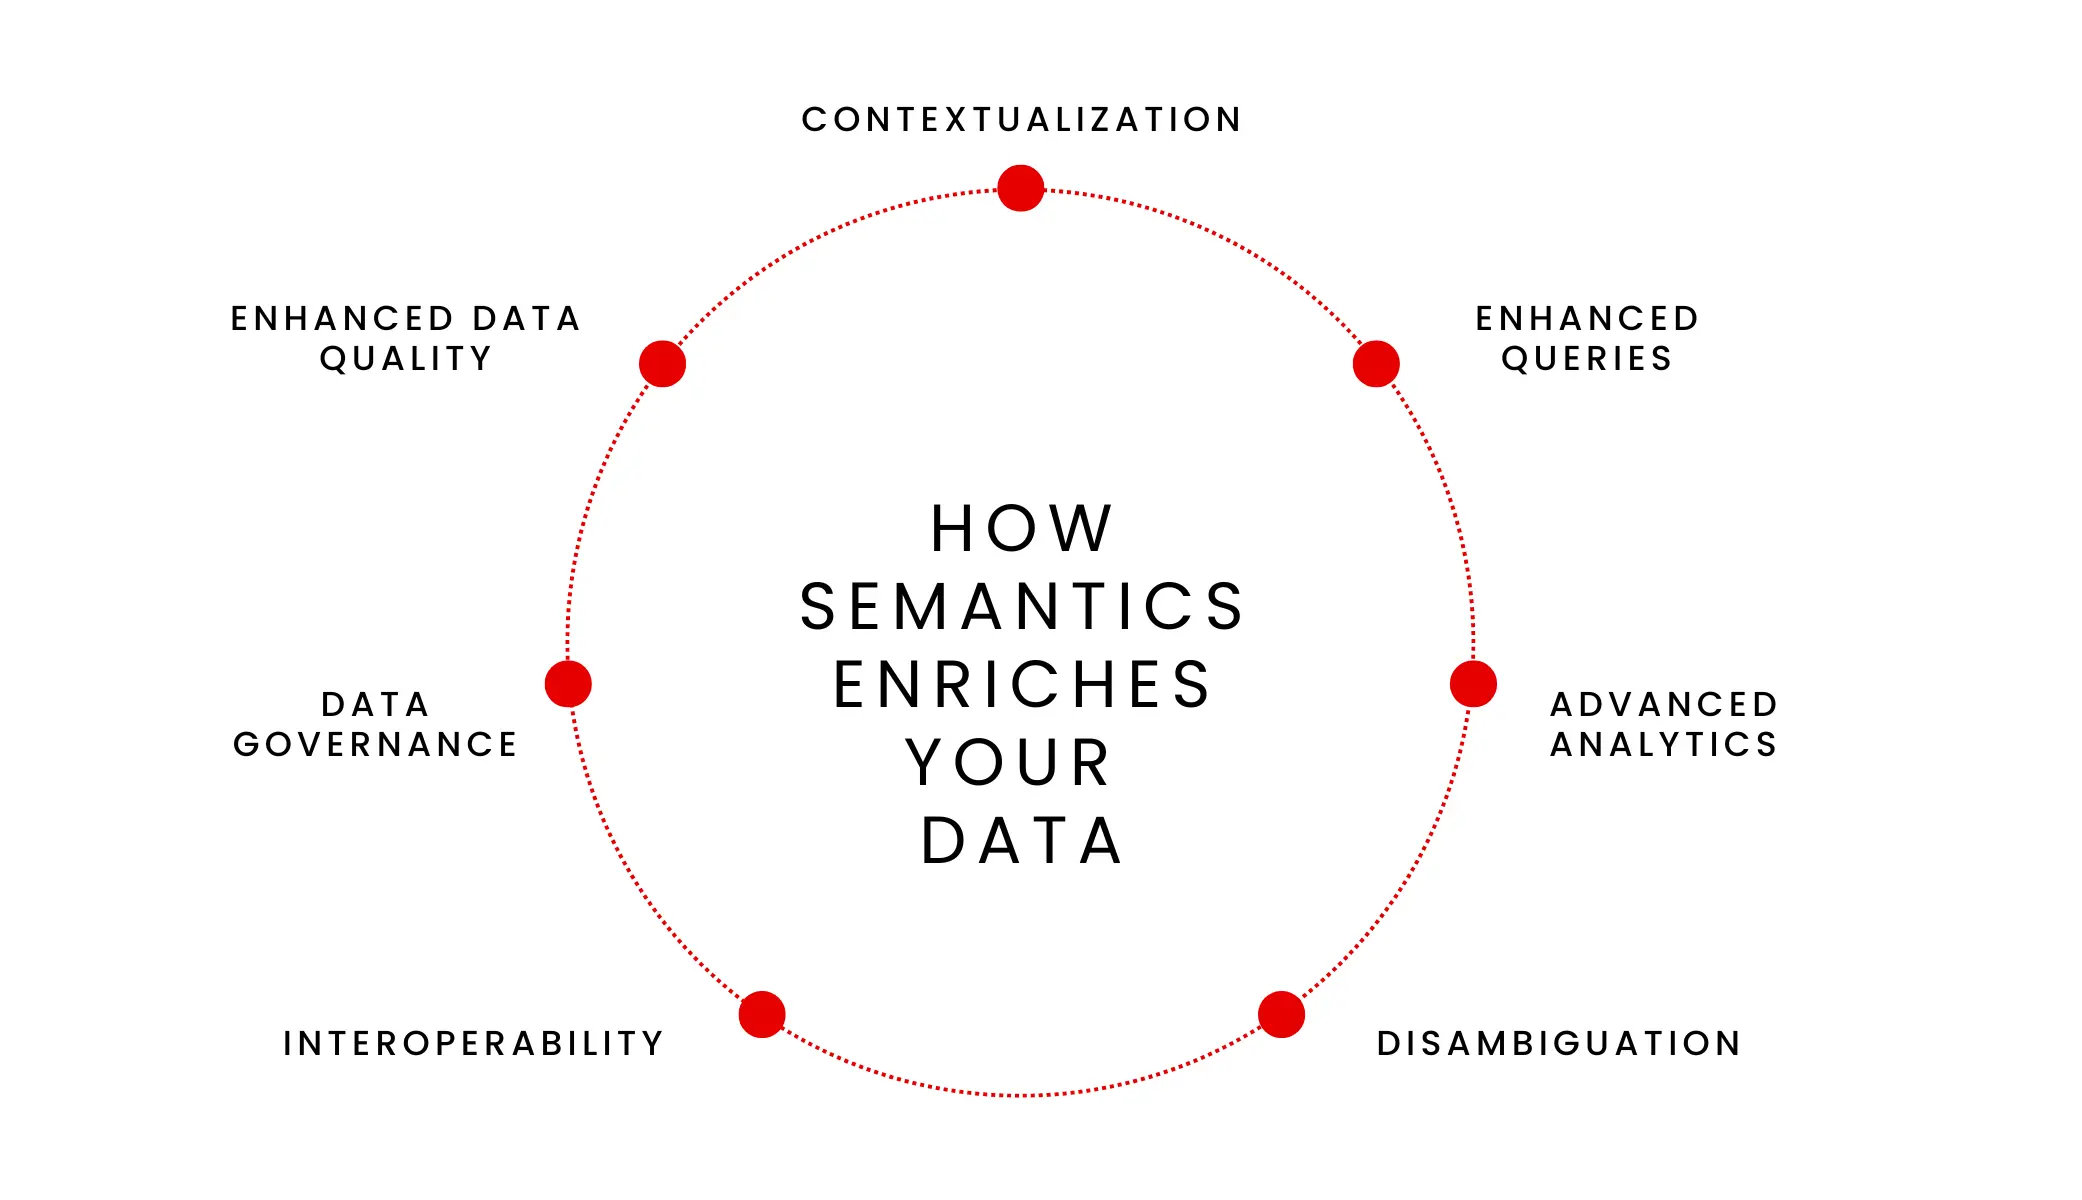 How Semantics Enriches Data with Context and Meaning